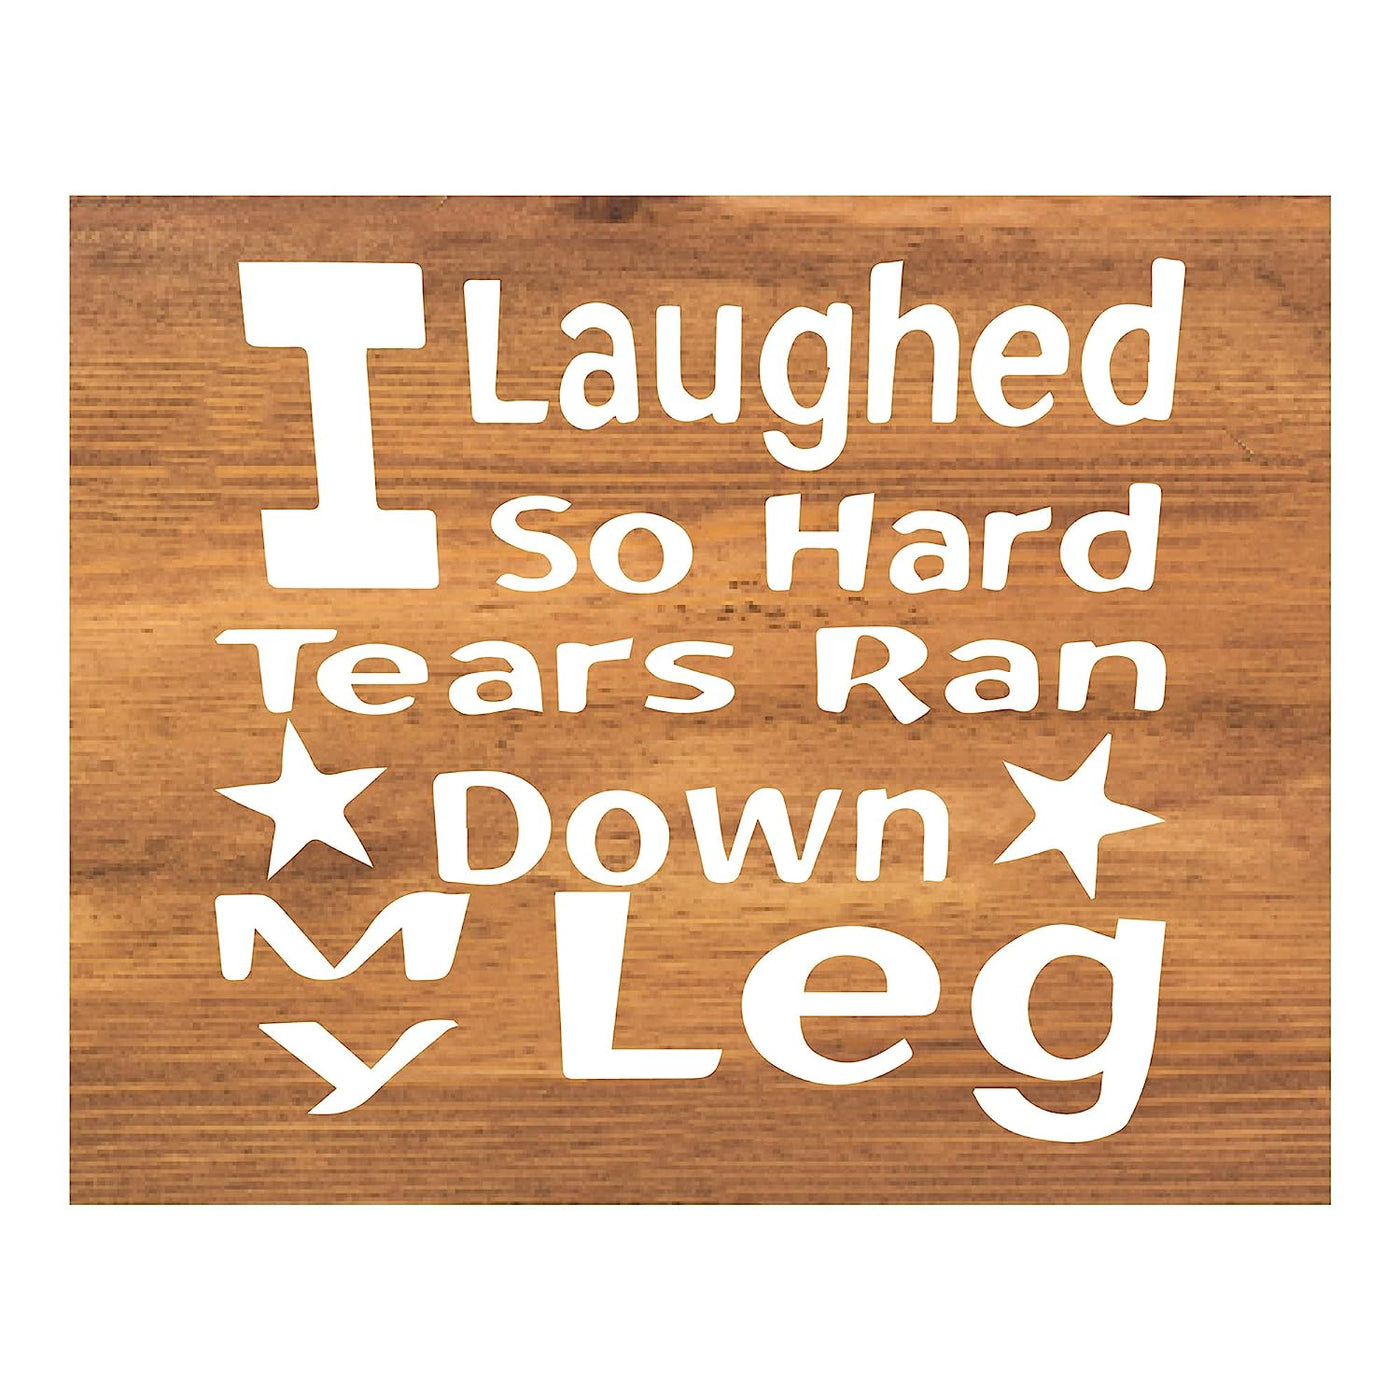 Laughed So Hard, Tears Ran Down My Leg- Funny Sign- 10 x 8" Print Wall Art- Rustic Wood Sign Design-Ready to Frame. Humorous Home-Office-Kitchen D?cor. Perfect for Bars, Restaurants & Man Cave.